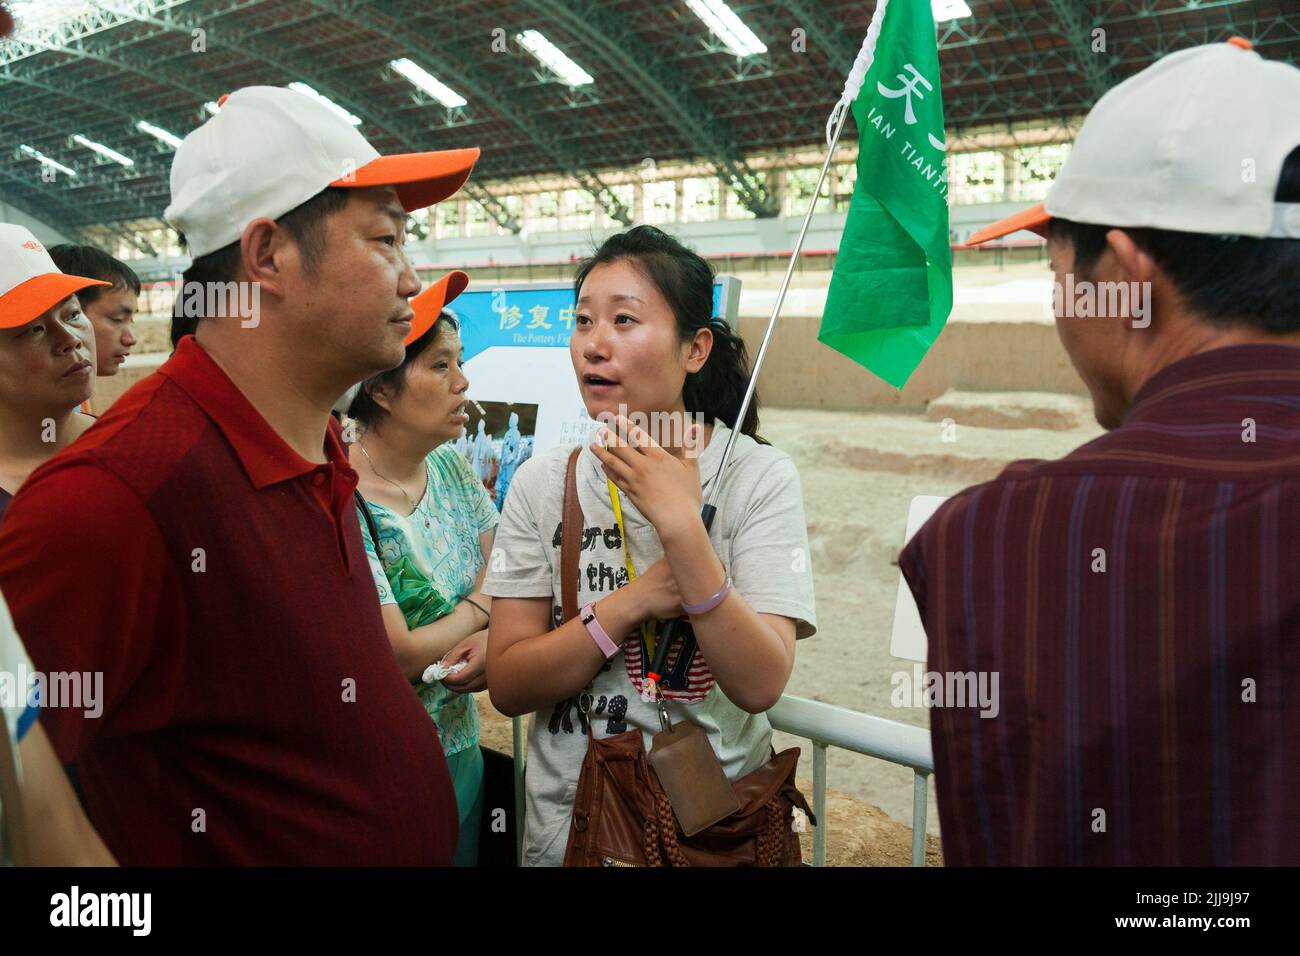 Tour guide with brightly coloured flag leading a party of Chinese tourists visiting / viewing pit 1 at The Terracotta Army at Emperor Qinshihuang's Mausoleum Site Museum in  Xi'An, China. PRC. (125) Stock Photo